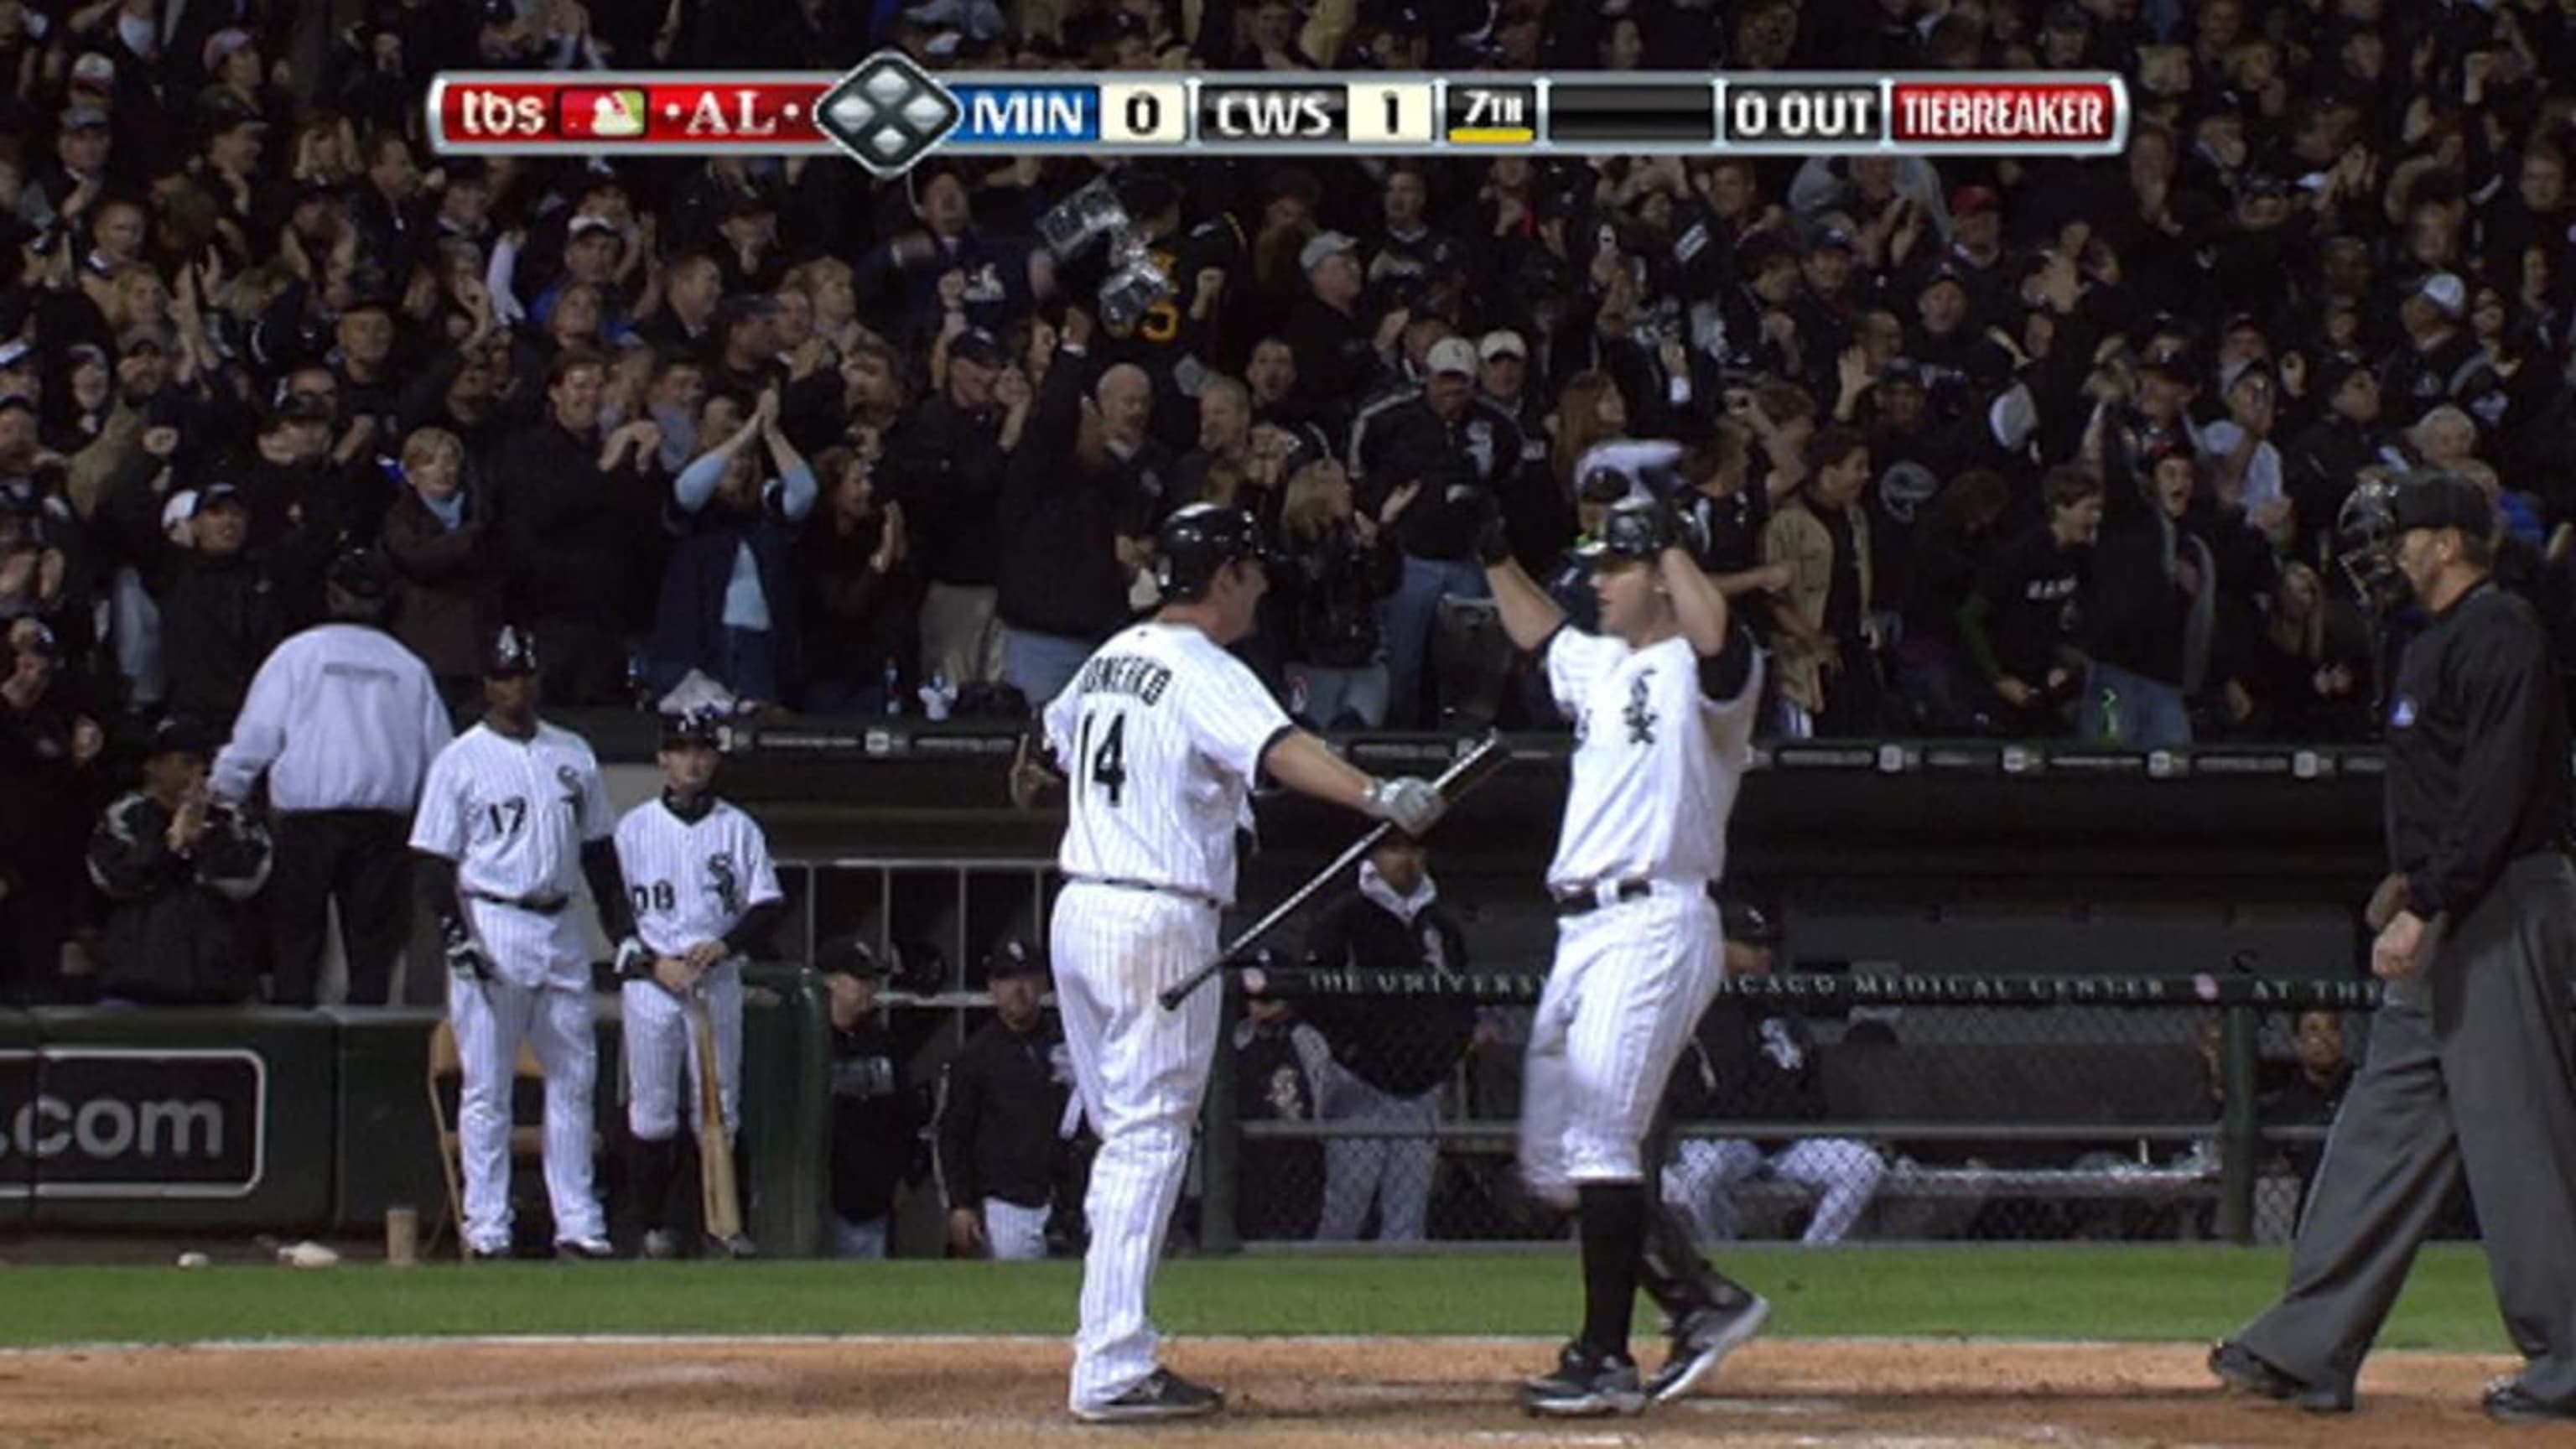 Chicago White Sox Fans, the 2008 Blackout Game, and the Power of